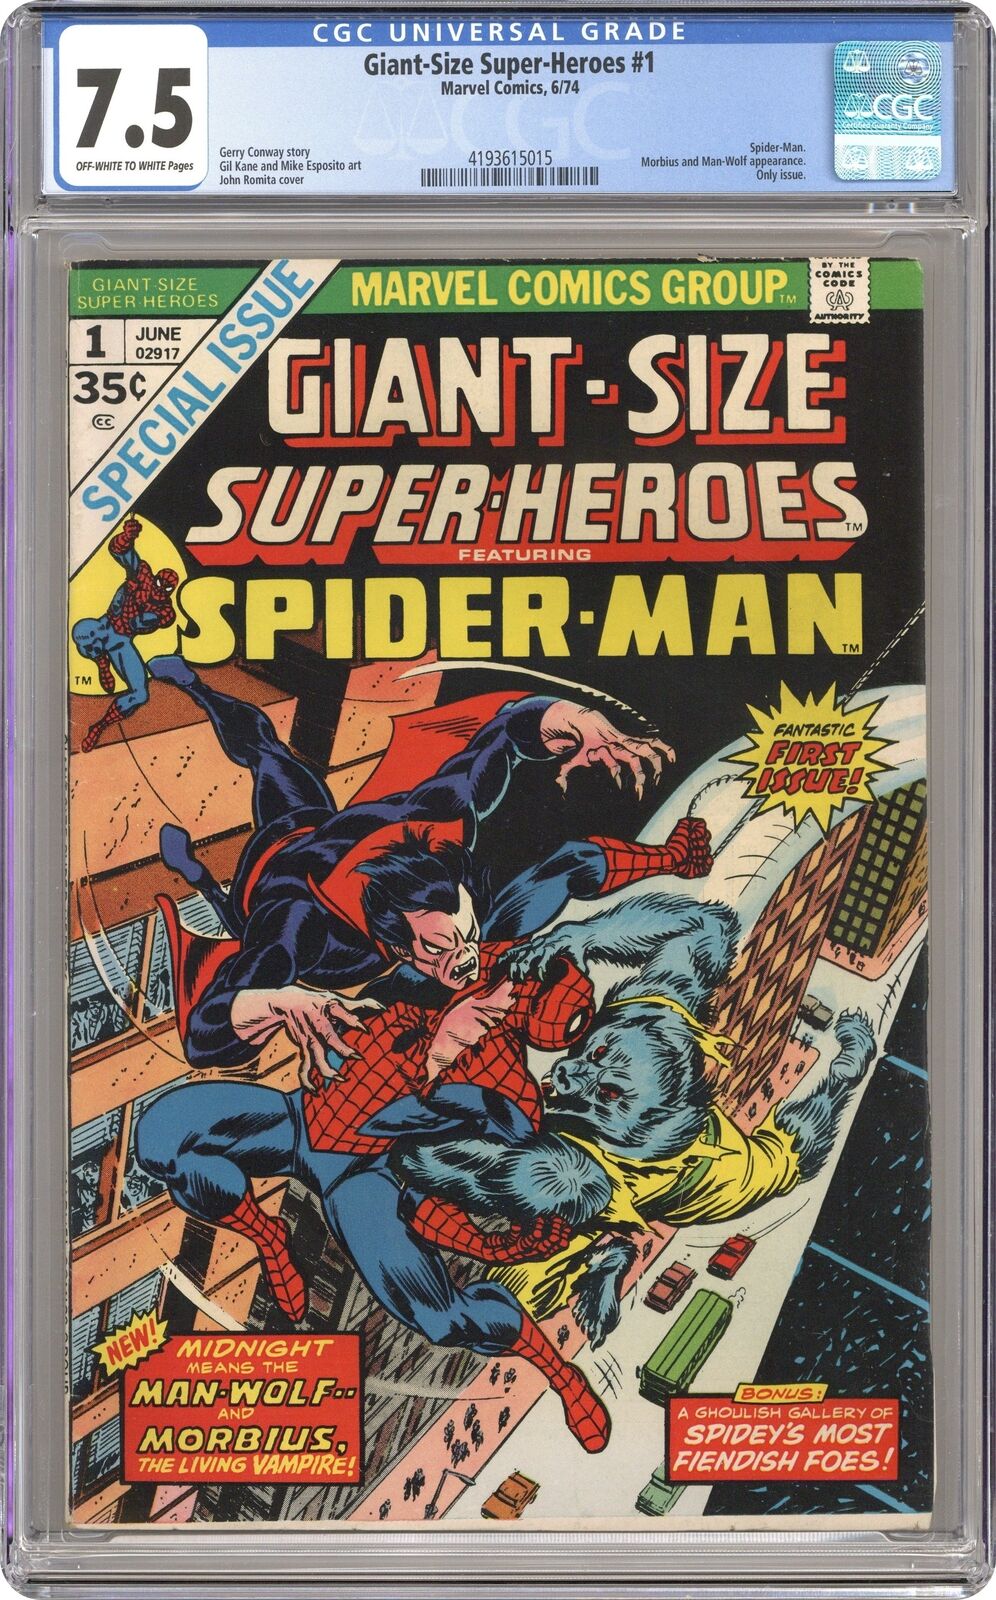 Giant Size Super Heroes Featuring Spider-Man #1 CGC 7.5 1974 4193615015